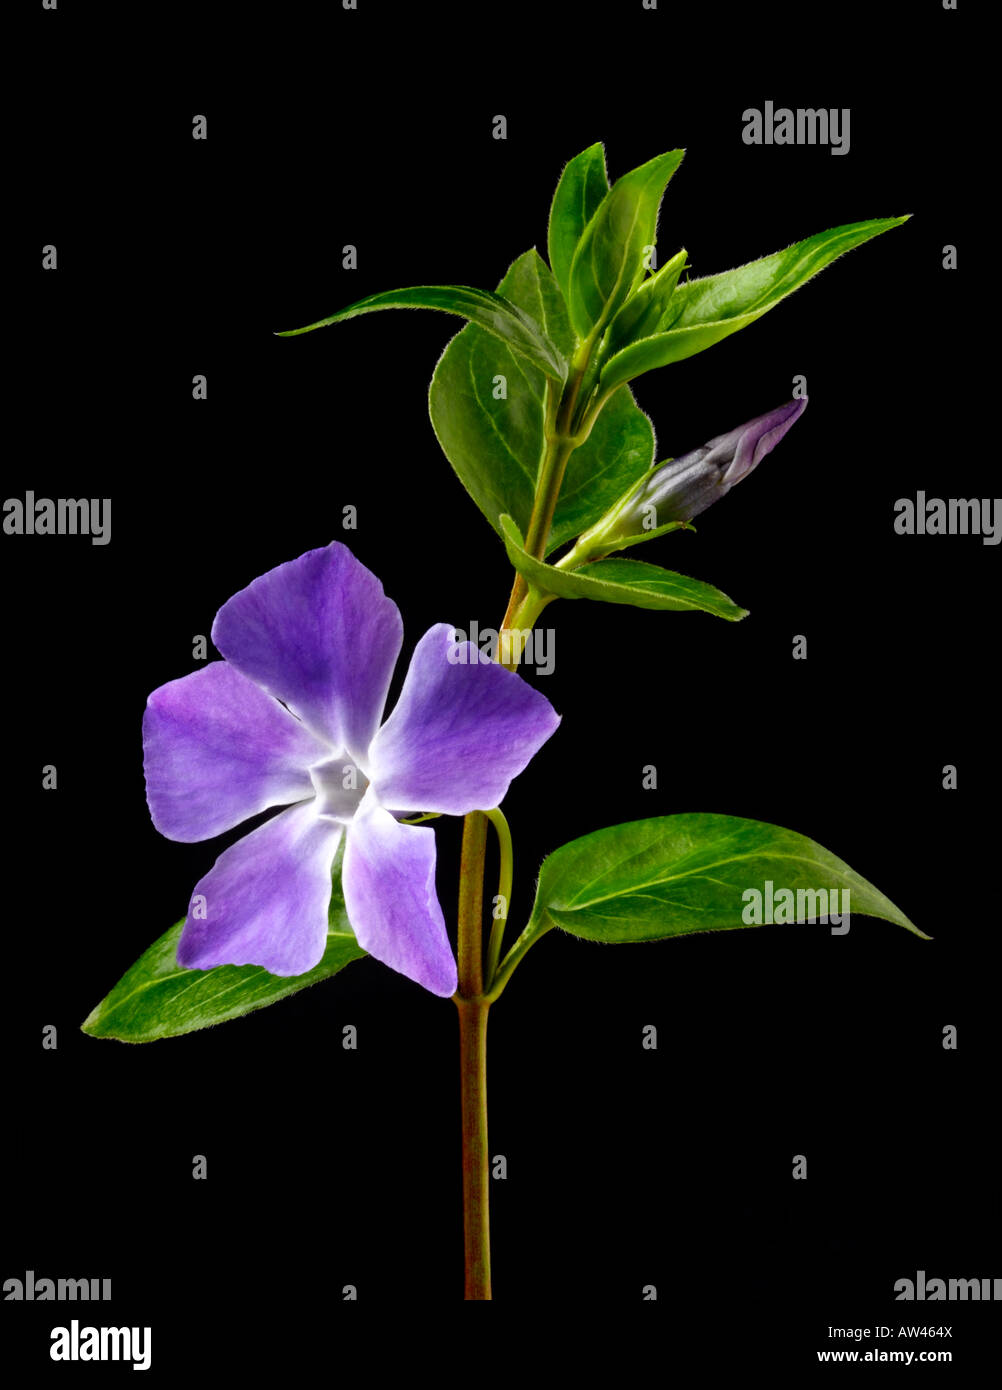 Periwinkles flowers against a black background. Stock Photo